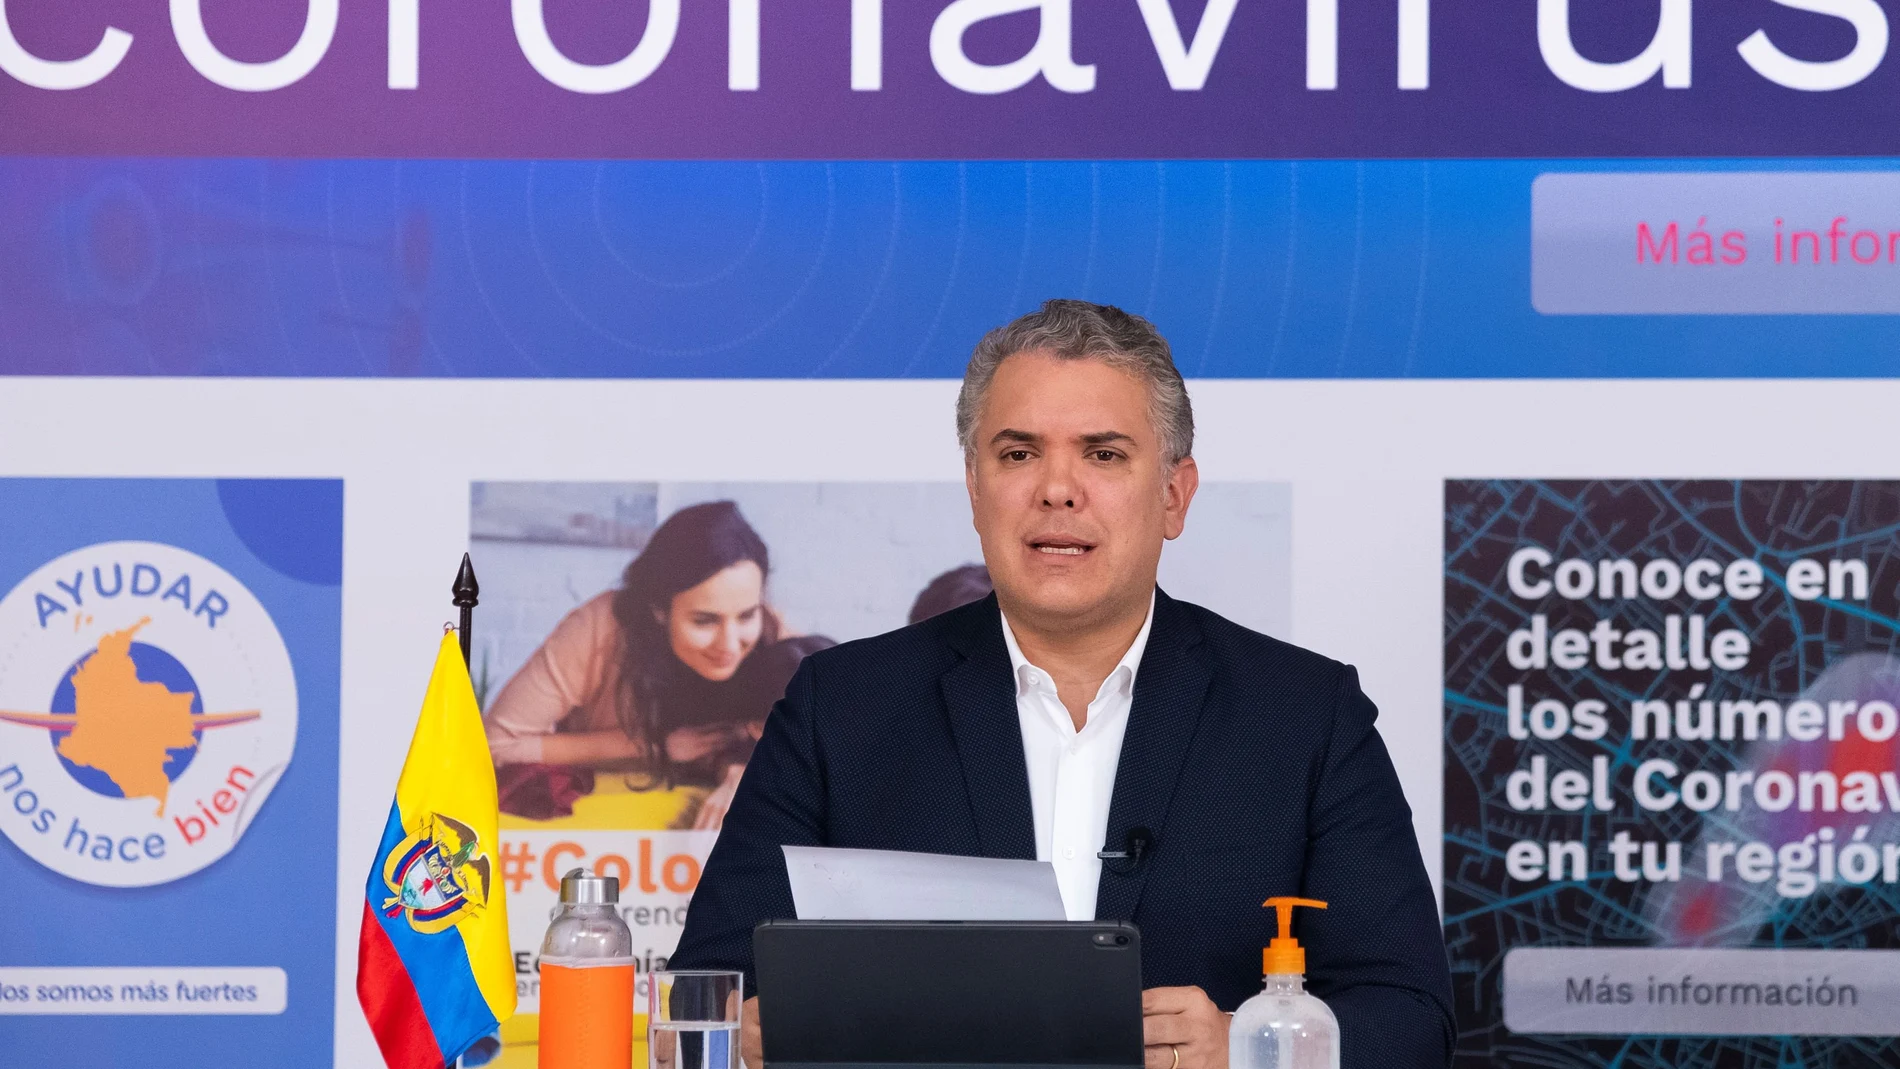 Colombia's President Ivan Duque speaks during a televised address, amidst the outbreak of COVID-19 in Bogota